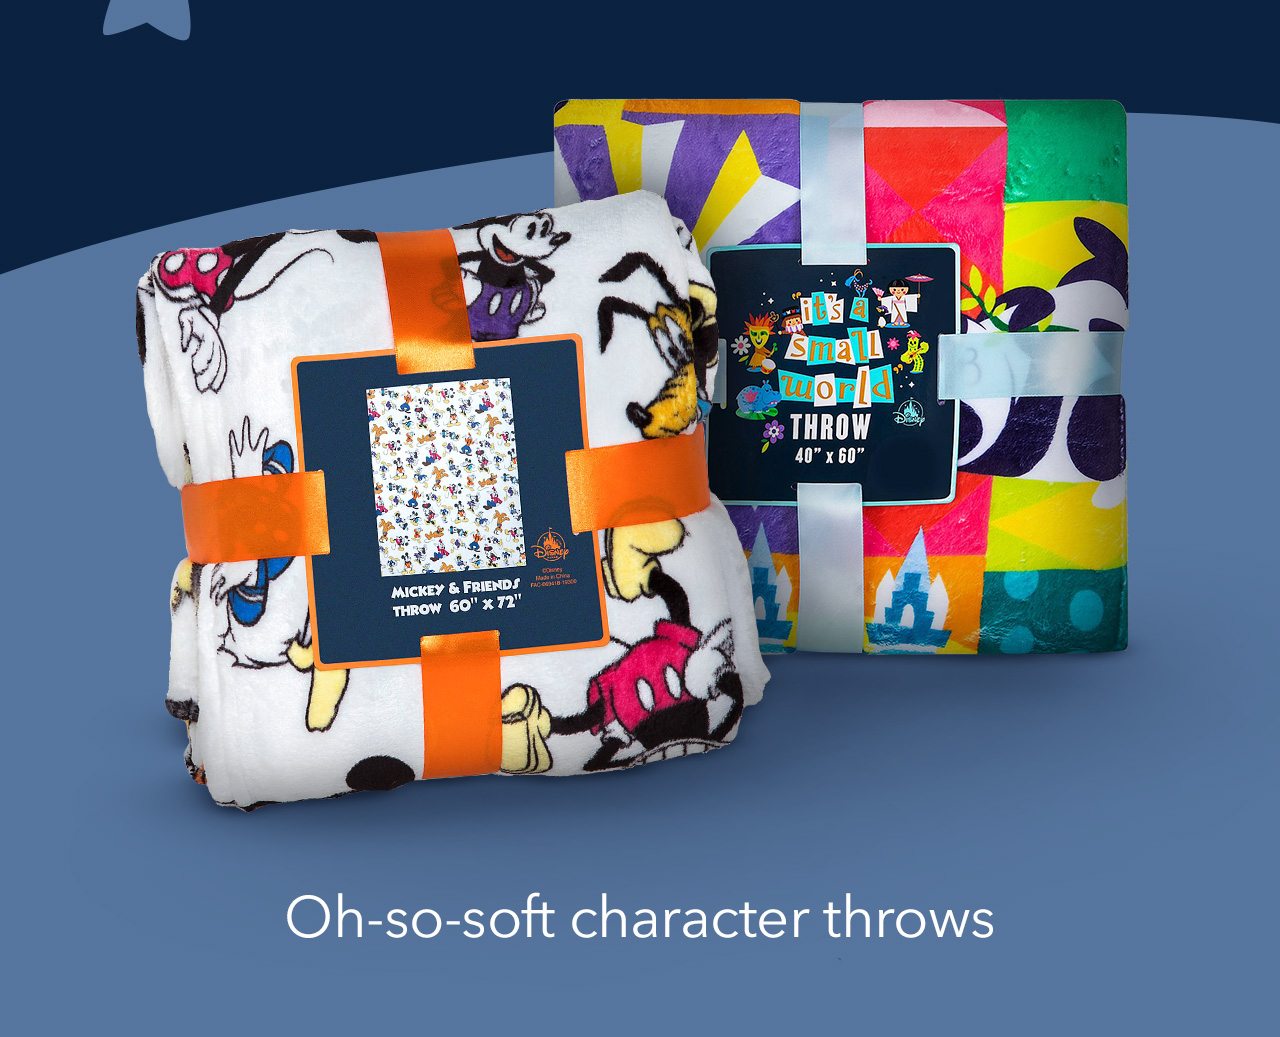 Oh-so-soft character throws